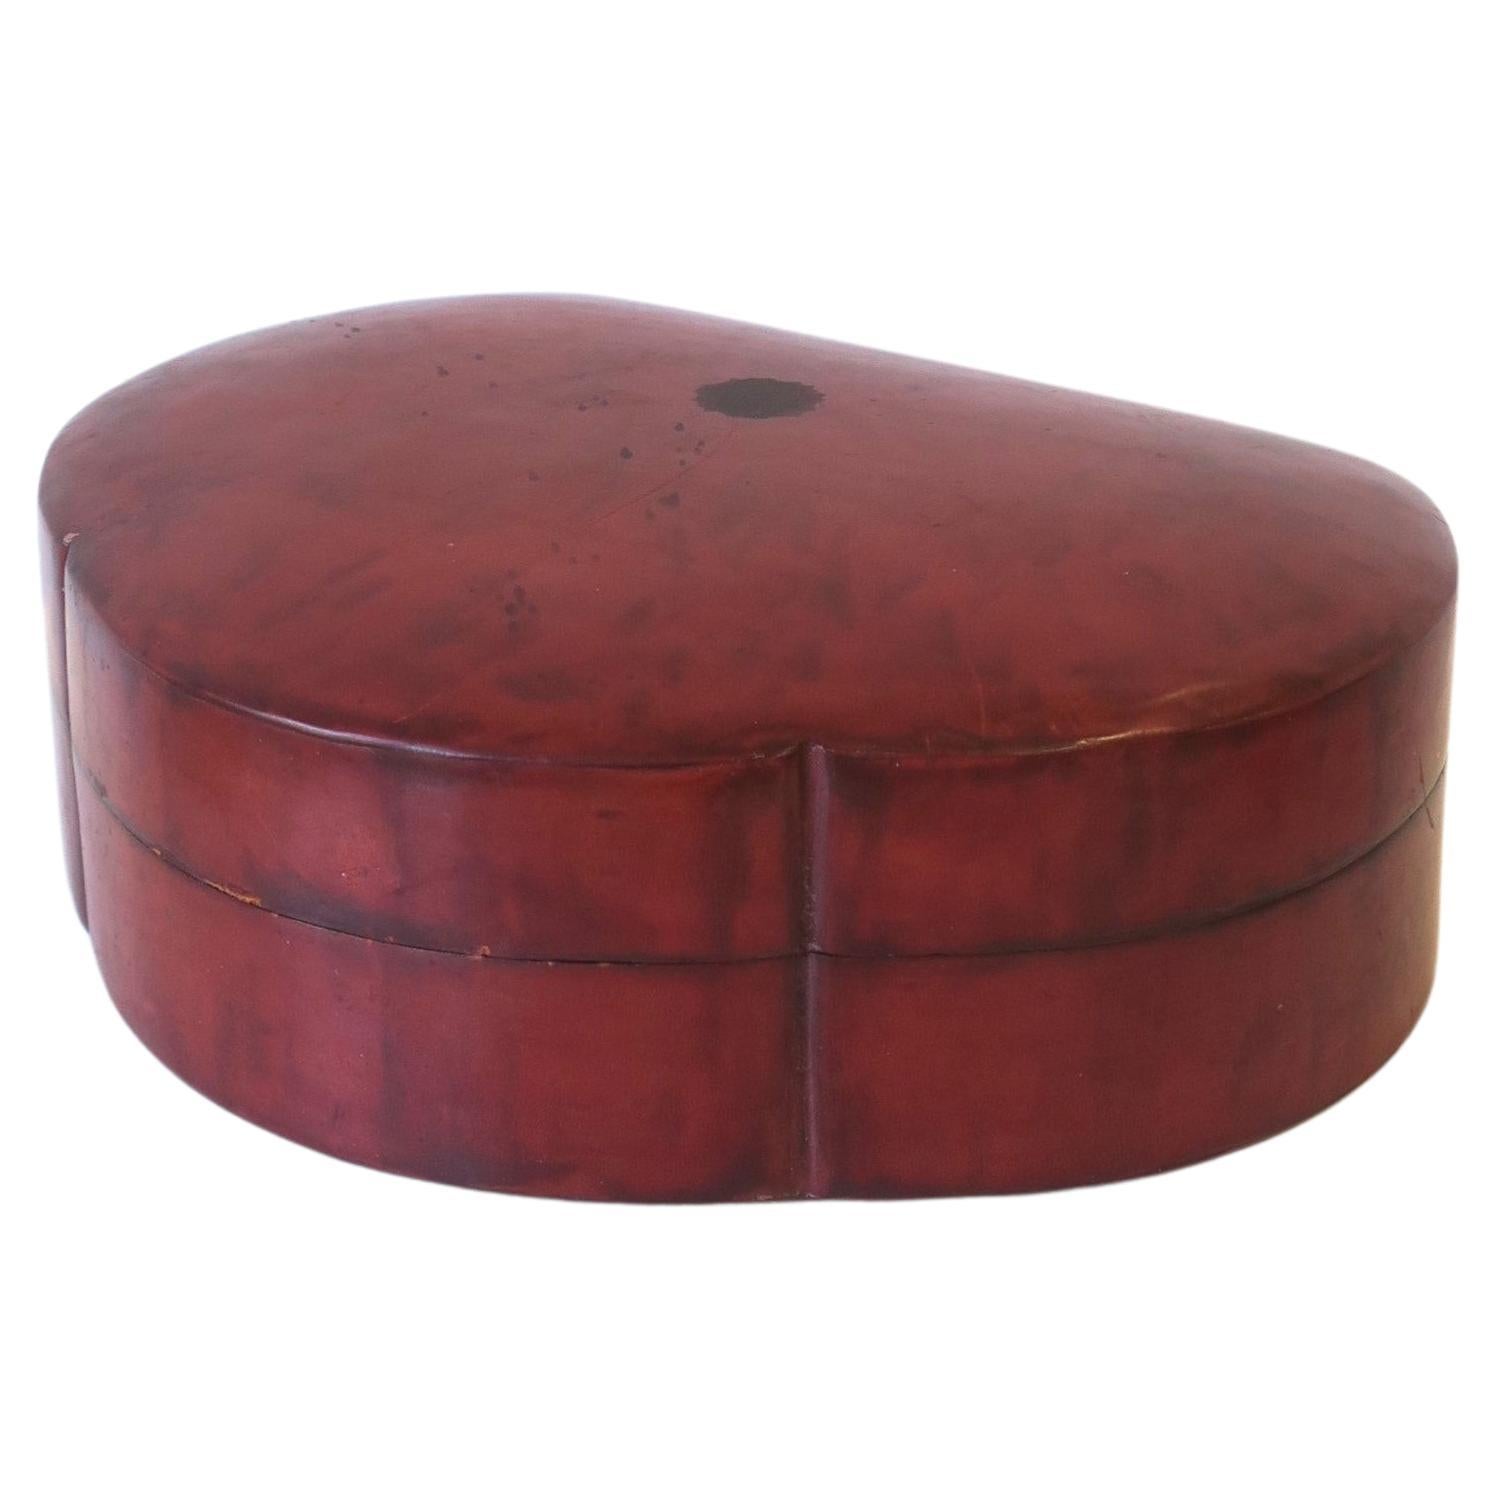 Italian Leather Jewelry Box with Scalloped Design